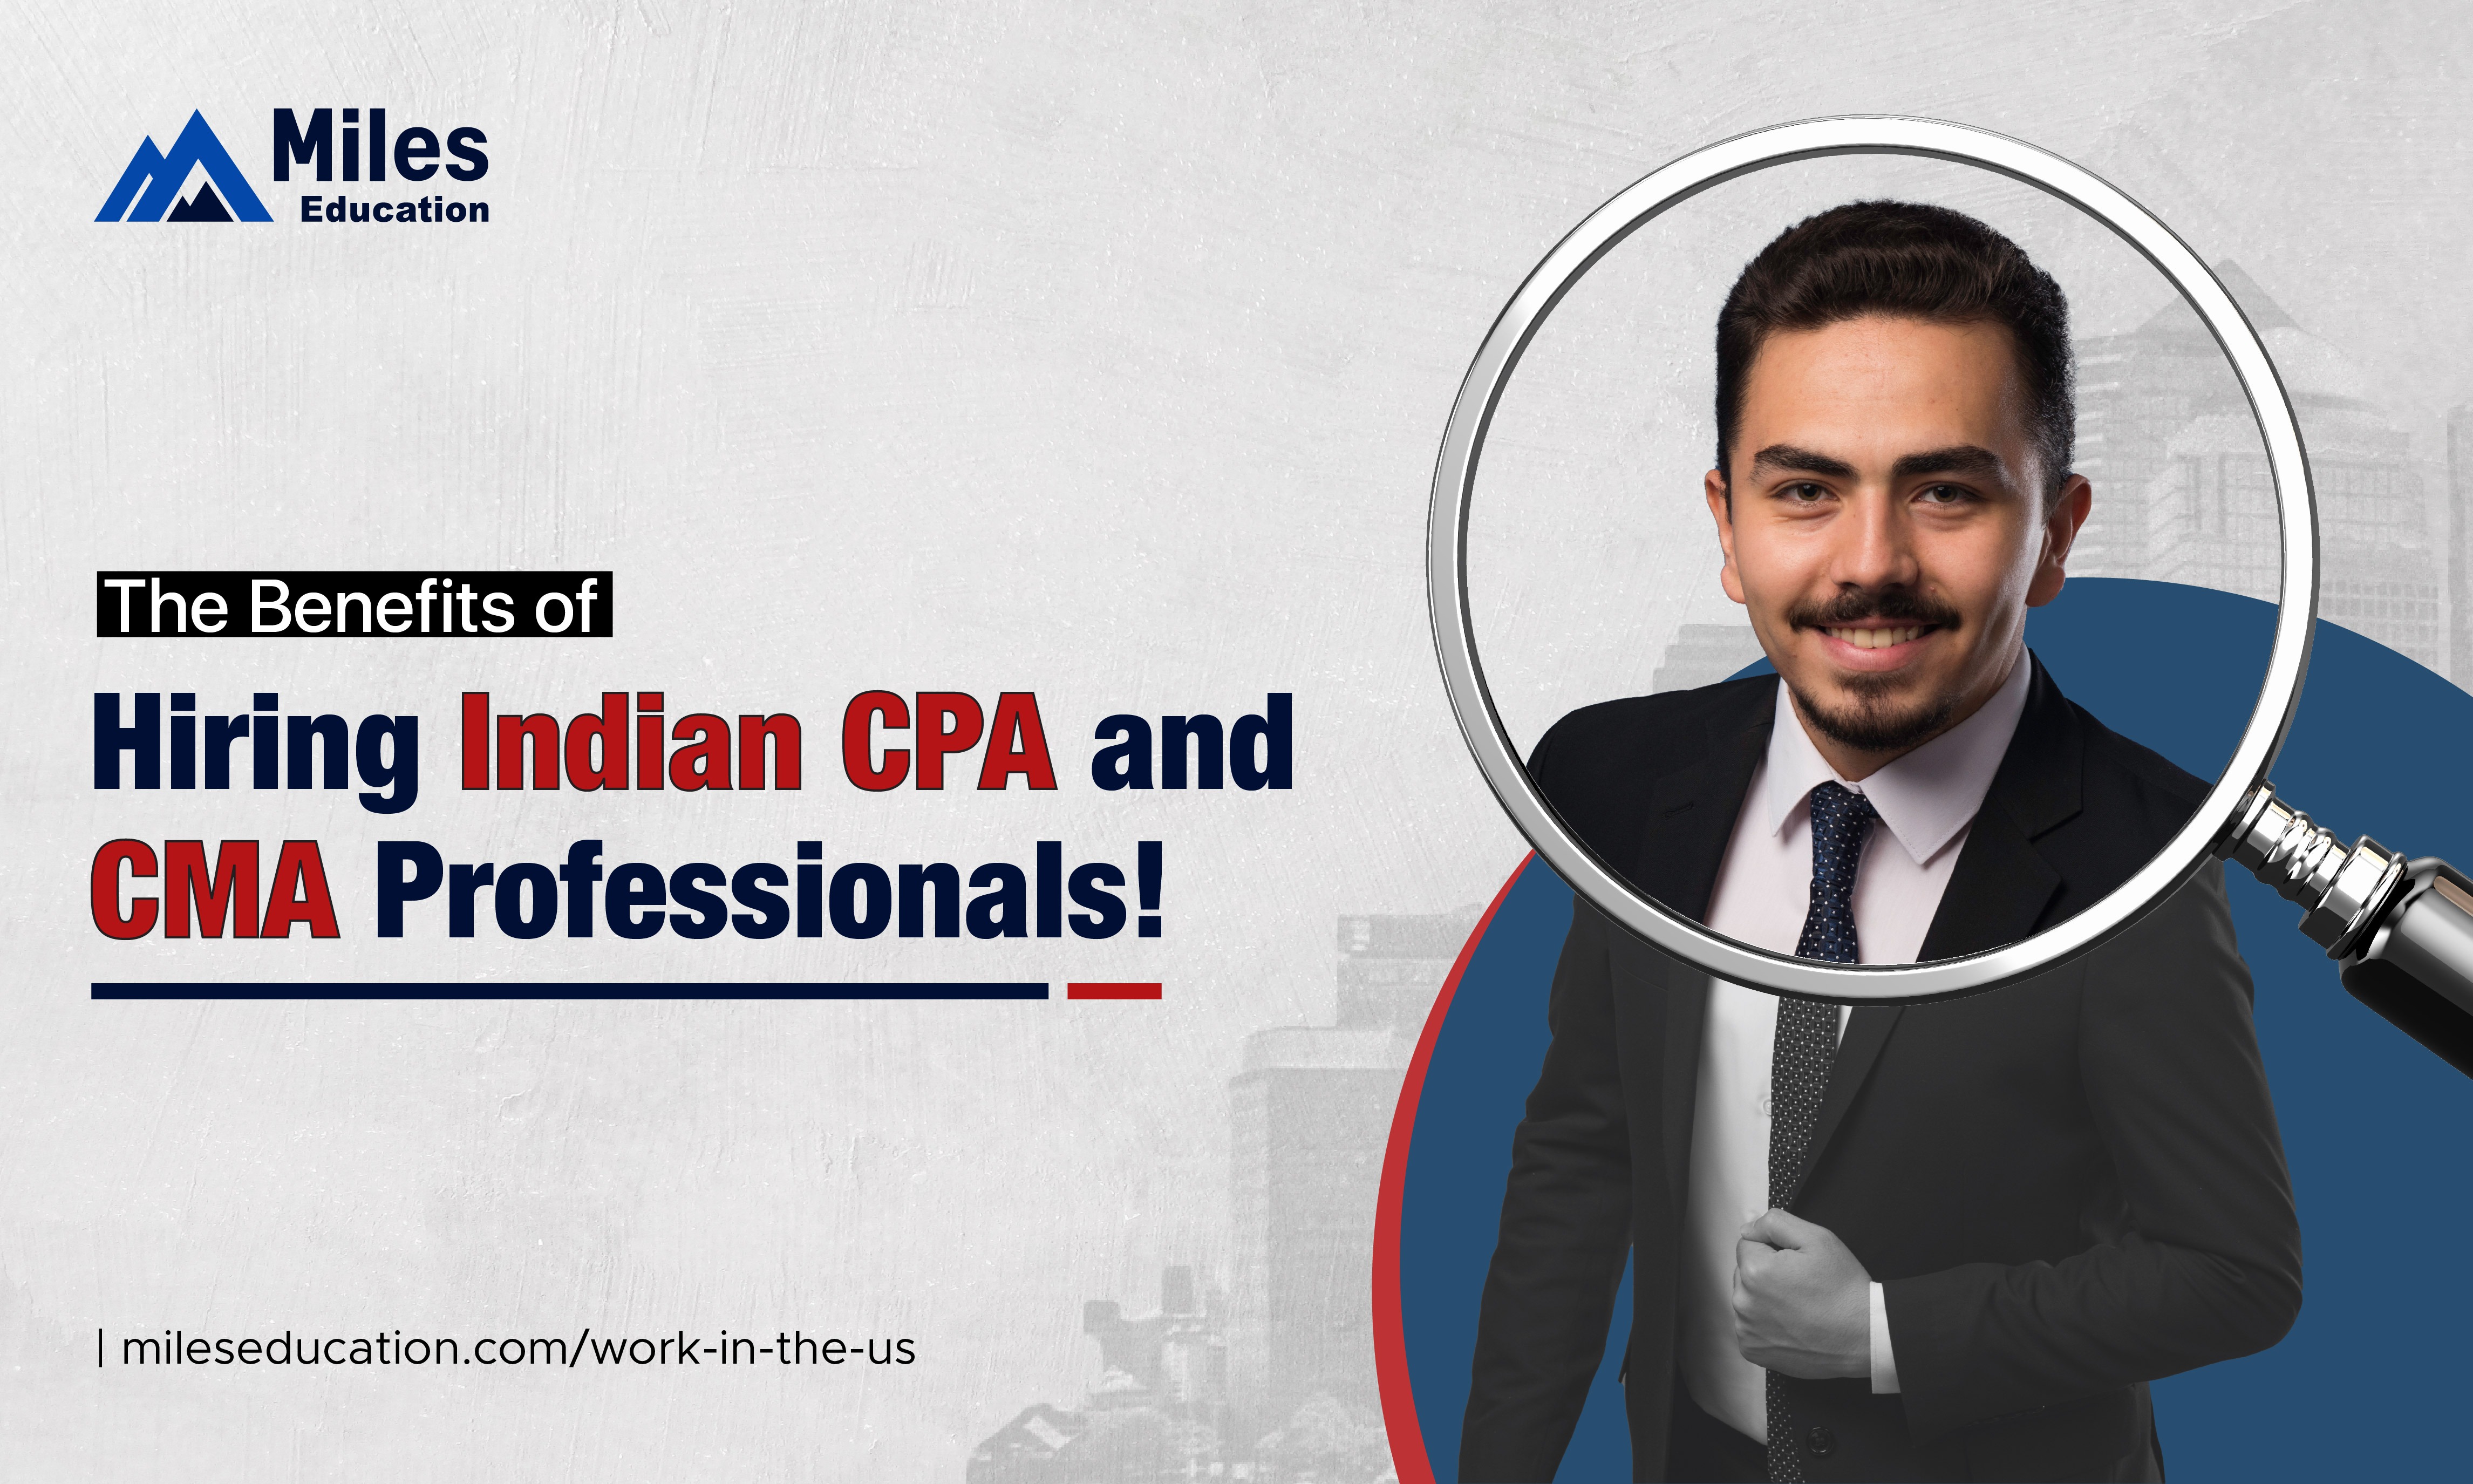 The benefits of hiring Indian CPA & CMA professionals